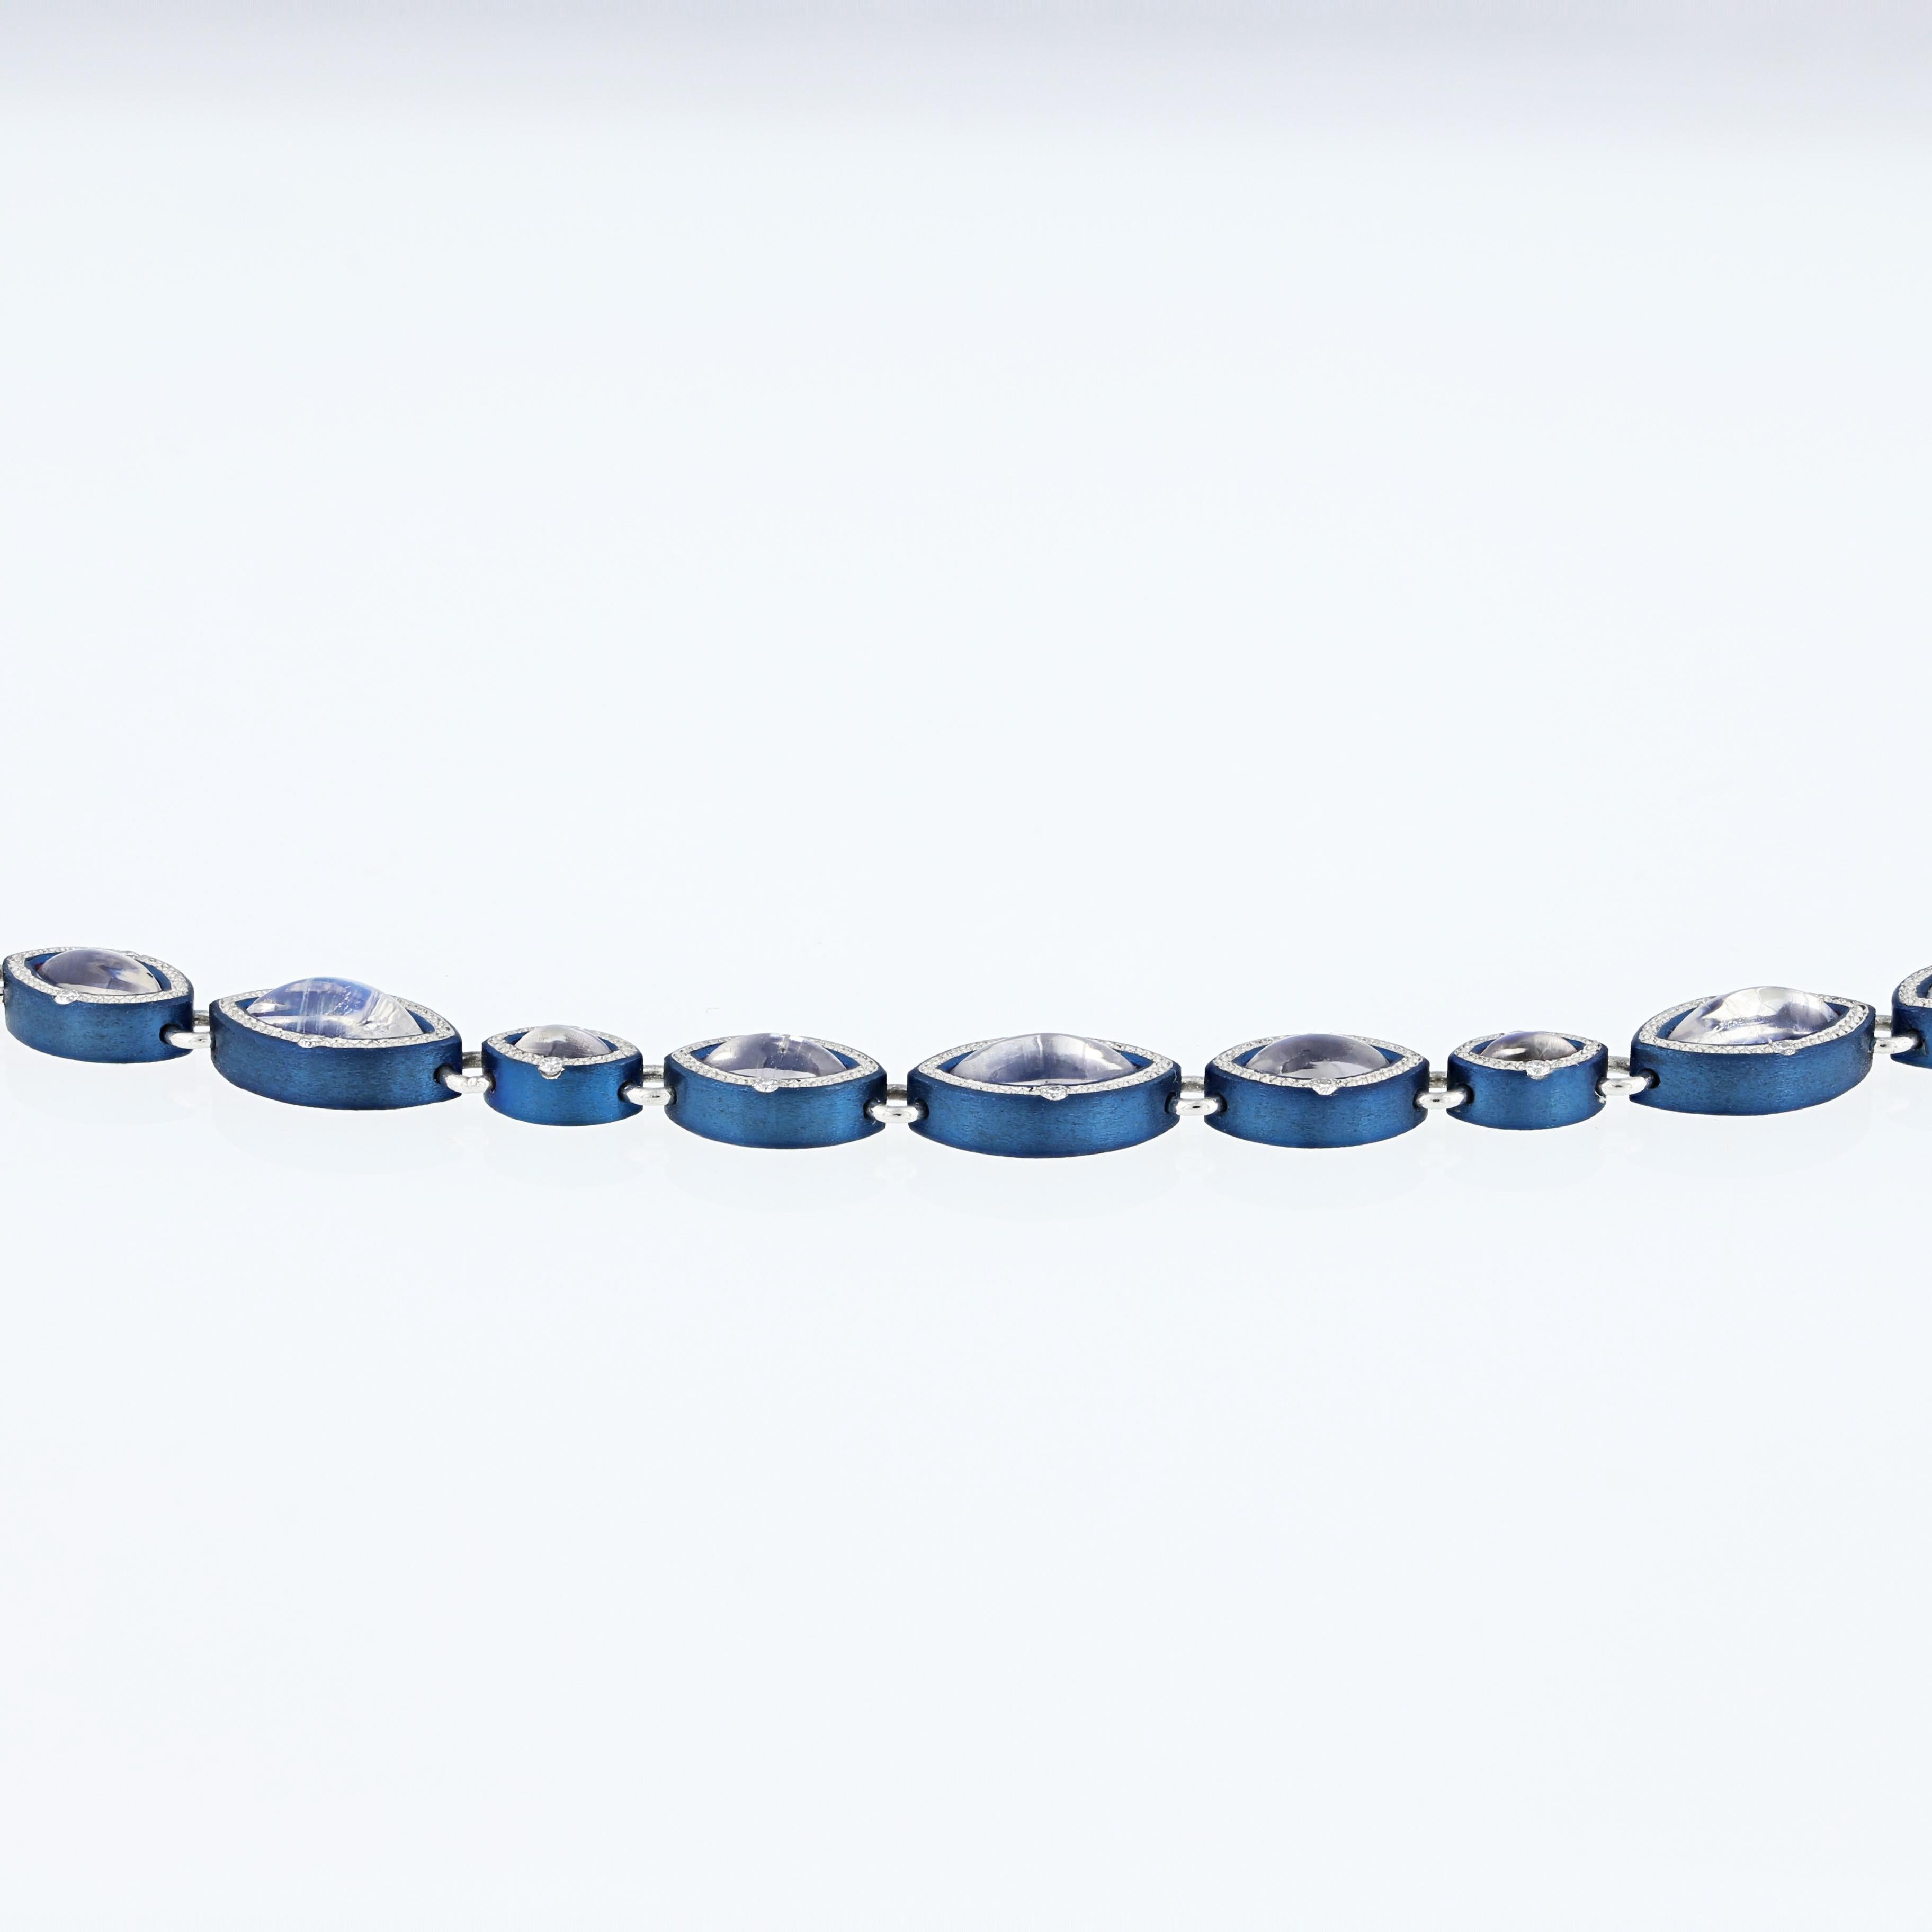 Contemporary Marquise Moonstone Bracelet in Blue Zirconium by Zoltan David For Sale